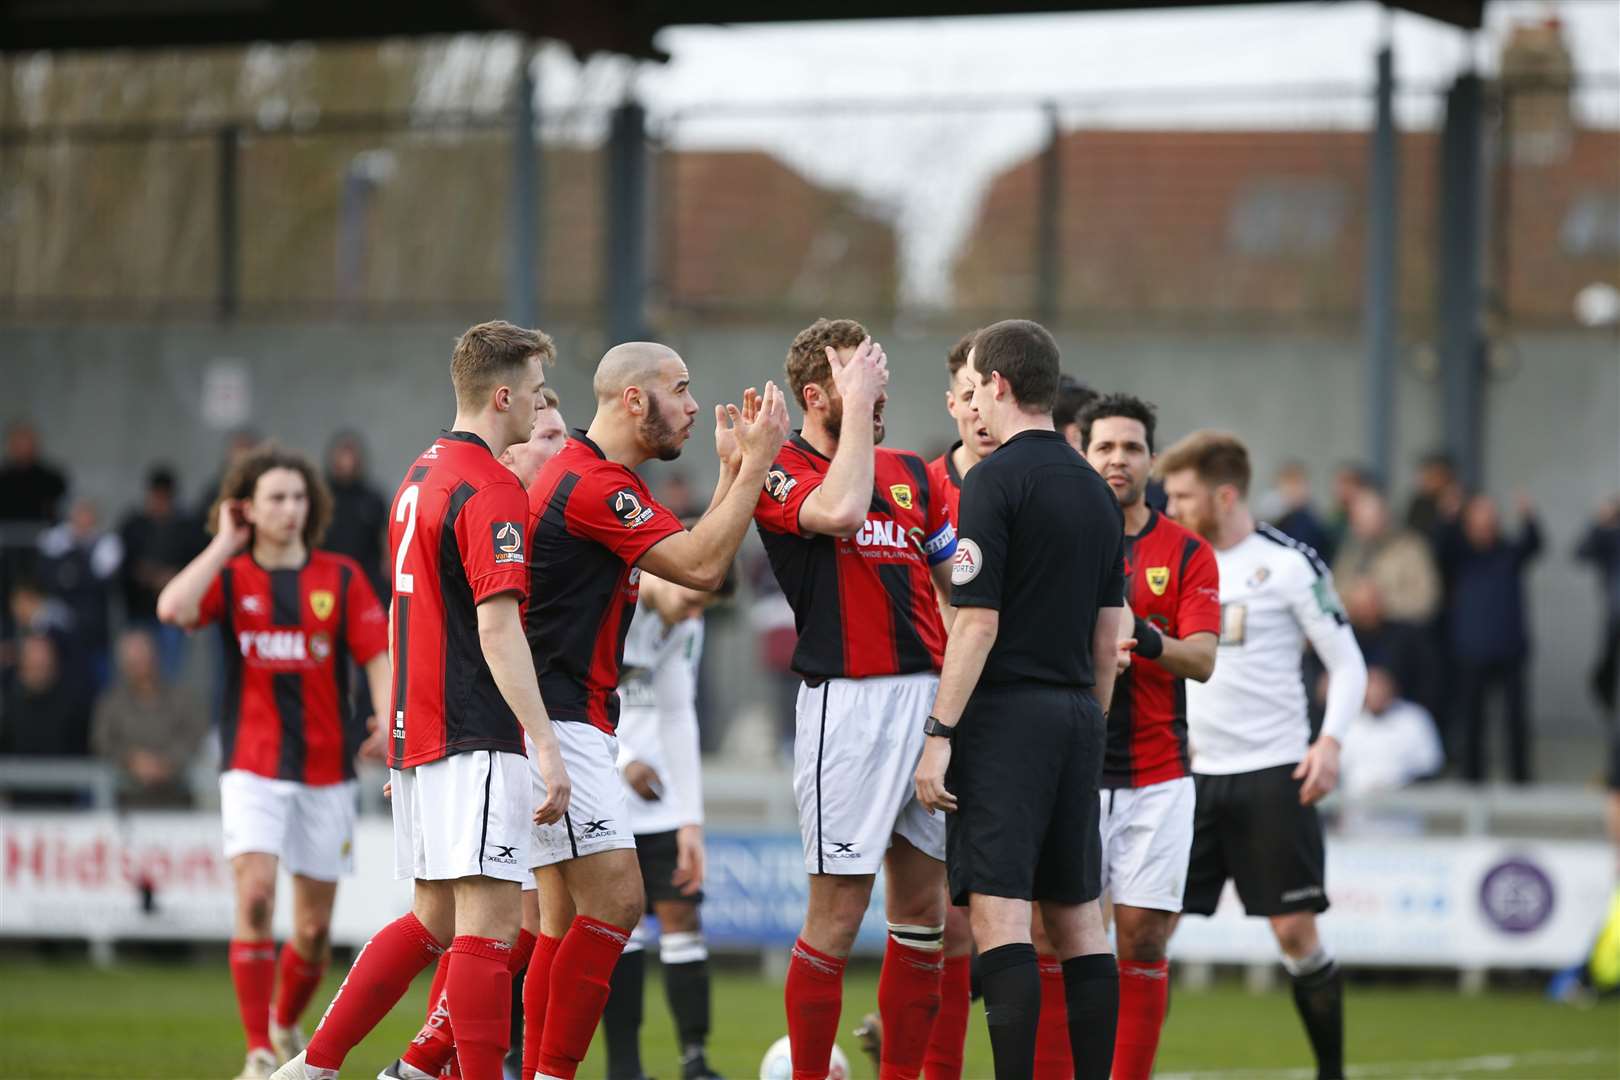 Gloucester can't believe it as Jack Packman awards Dartford a penalty Picture: Andy Jones